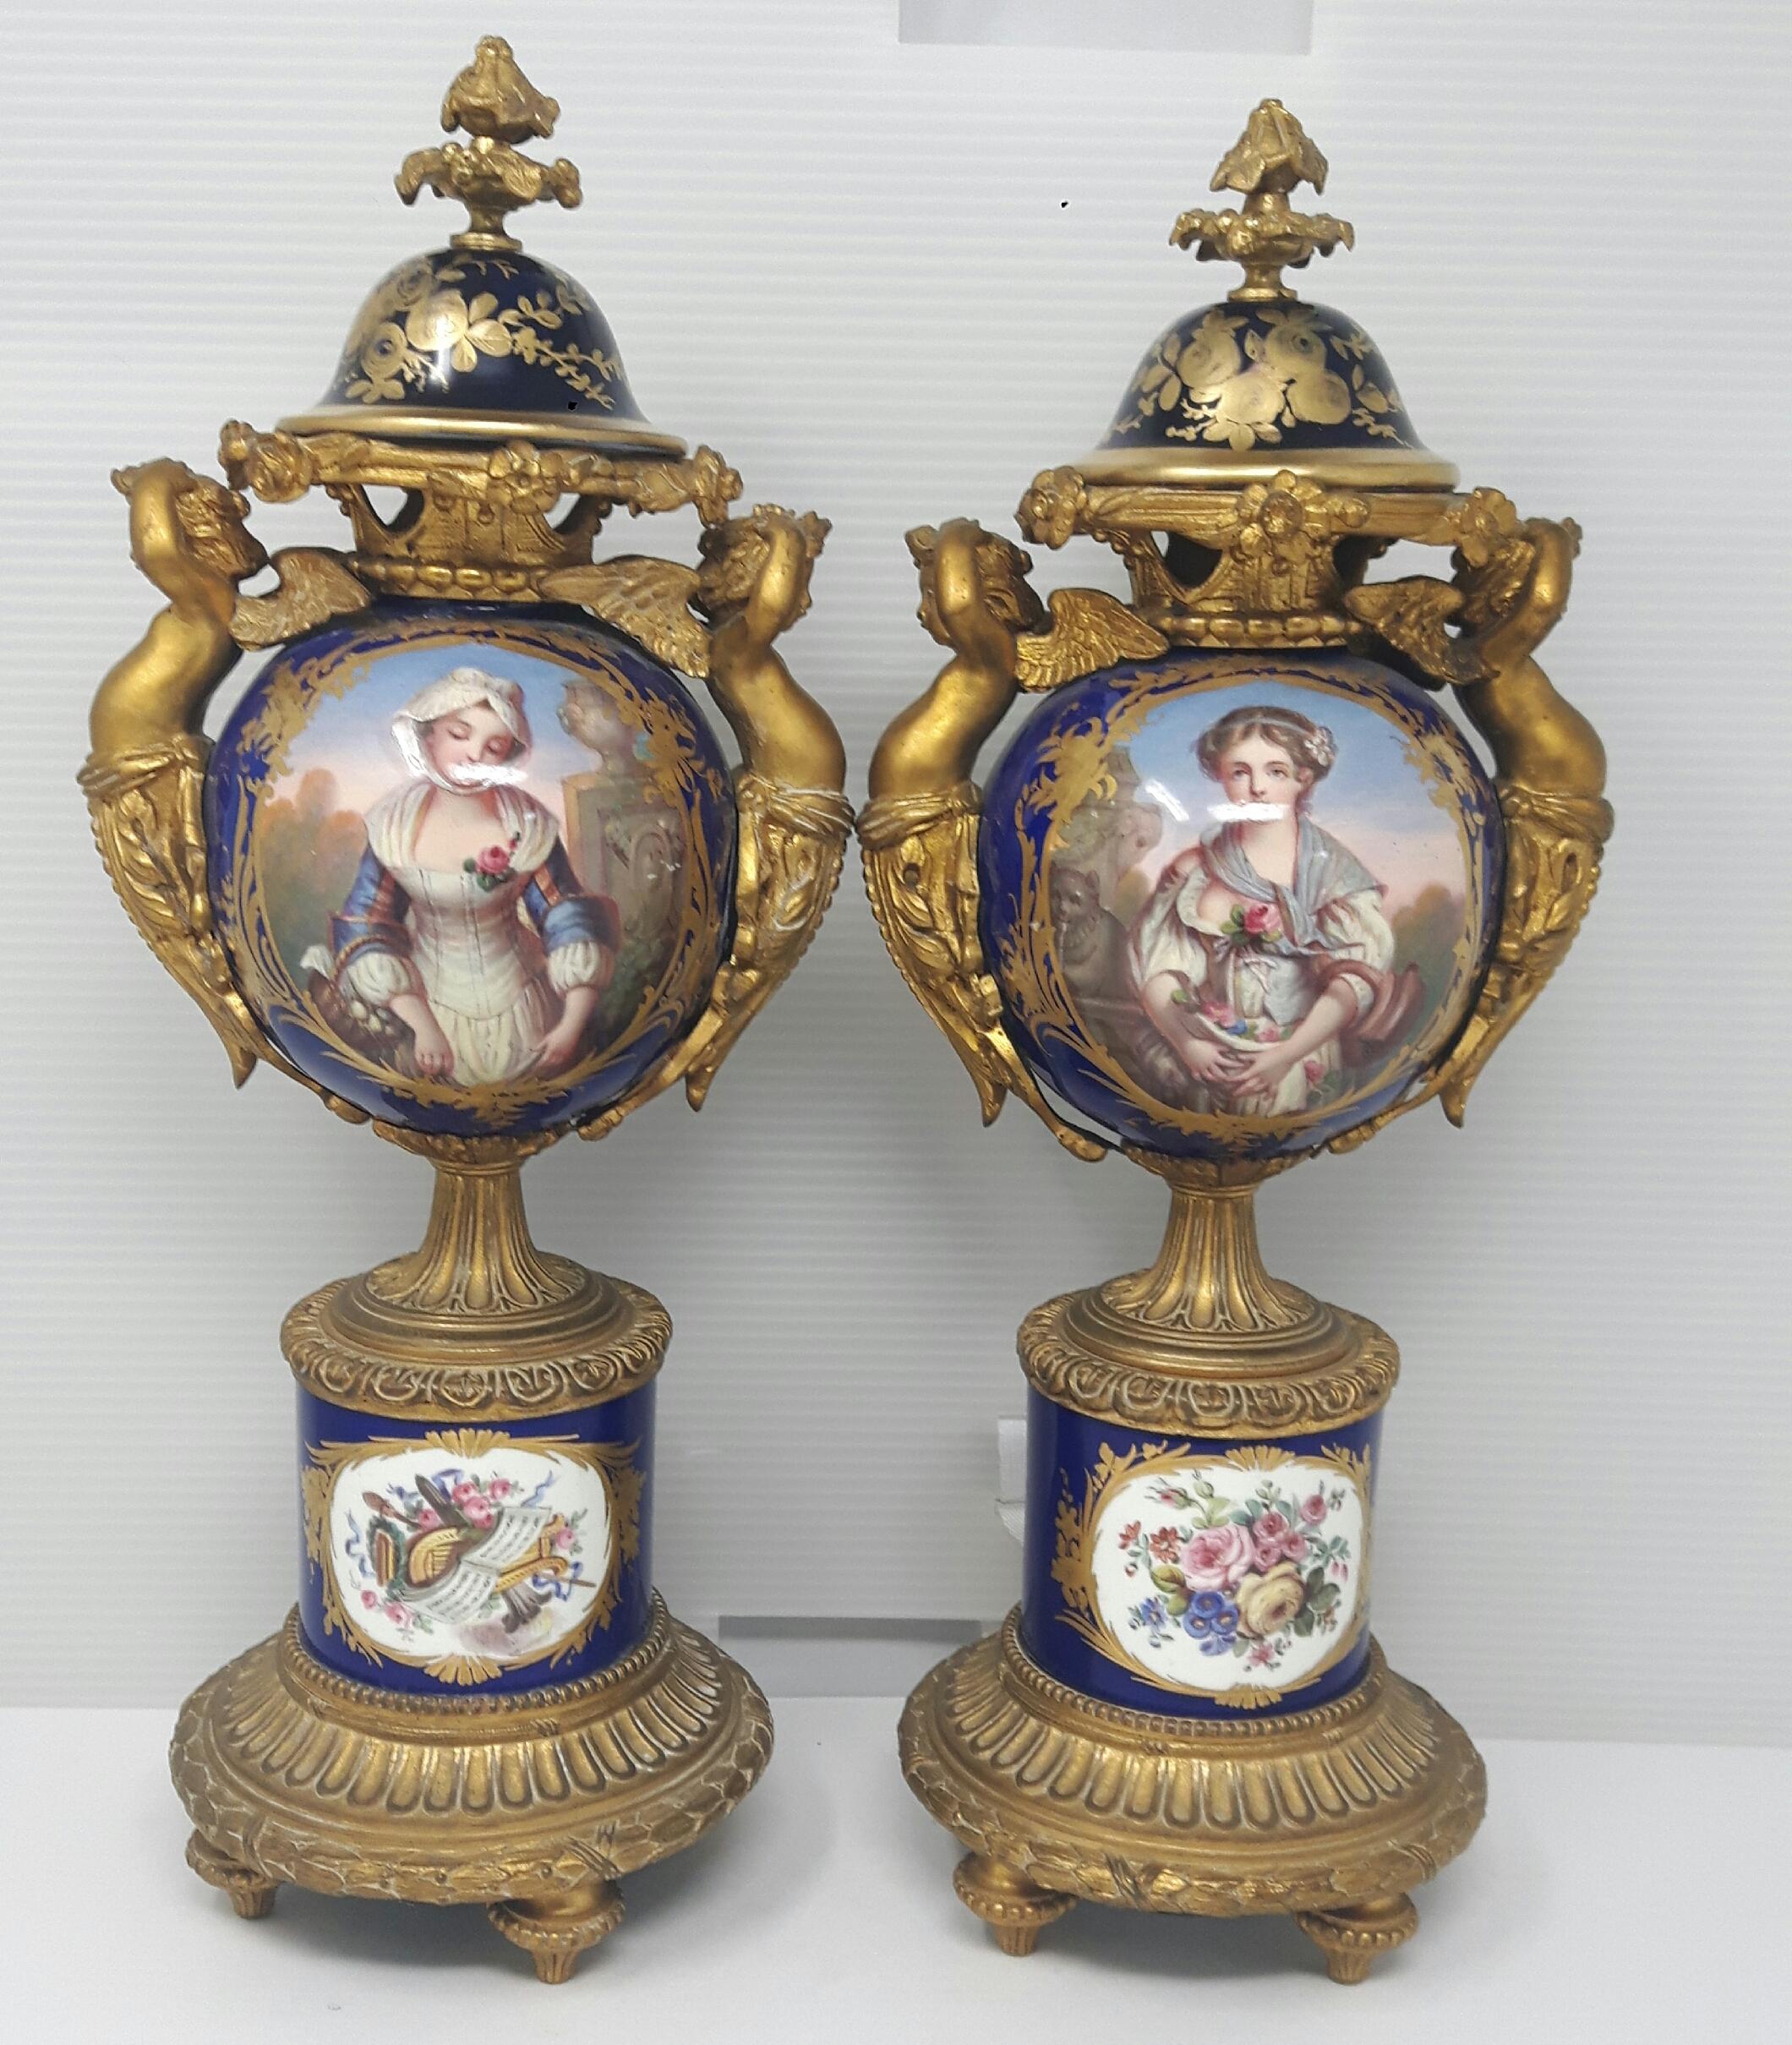 A pair of Sèvres-style vases painted with cartouches after Jean-Baptiste Greuze representing chastity and womanhood. The body of the vases is encased by an extremely high quality of gilt bronze cupidons or winged cupids and Rococo bases all in the